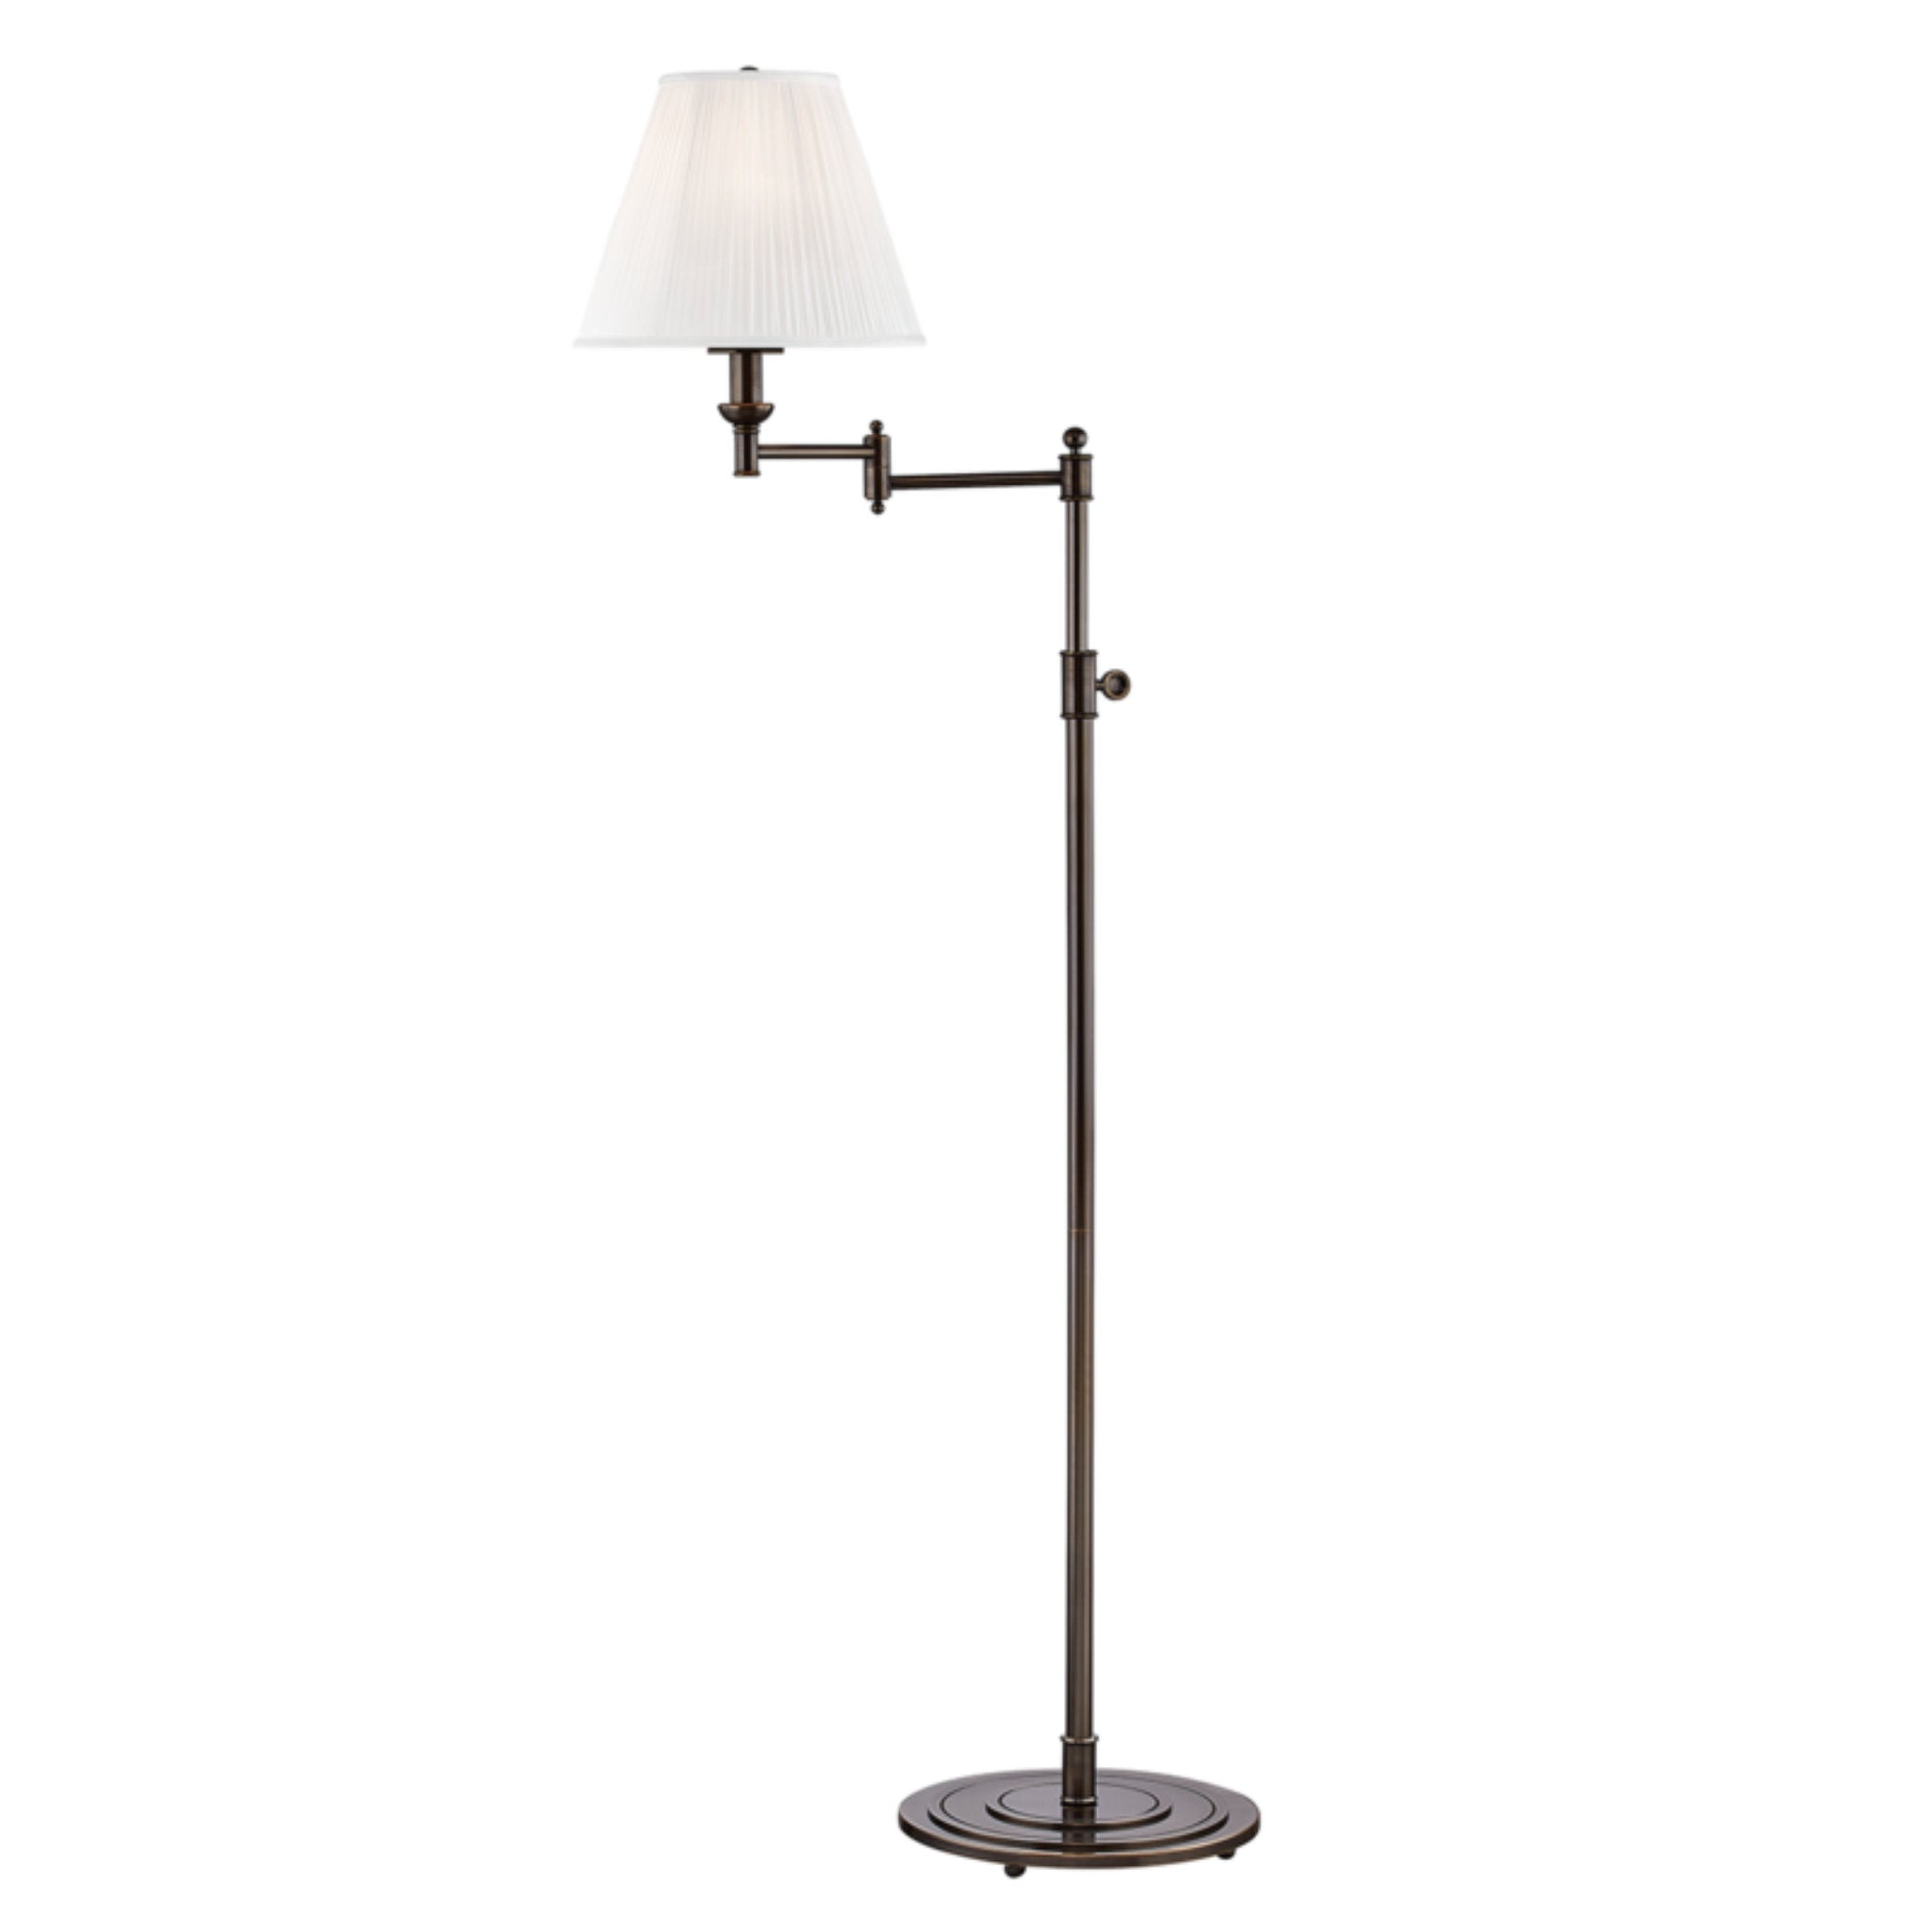 Signature No.1 1 Light Floor Lamp in Distressed Bronze by Mark D. Sikes